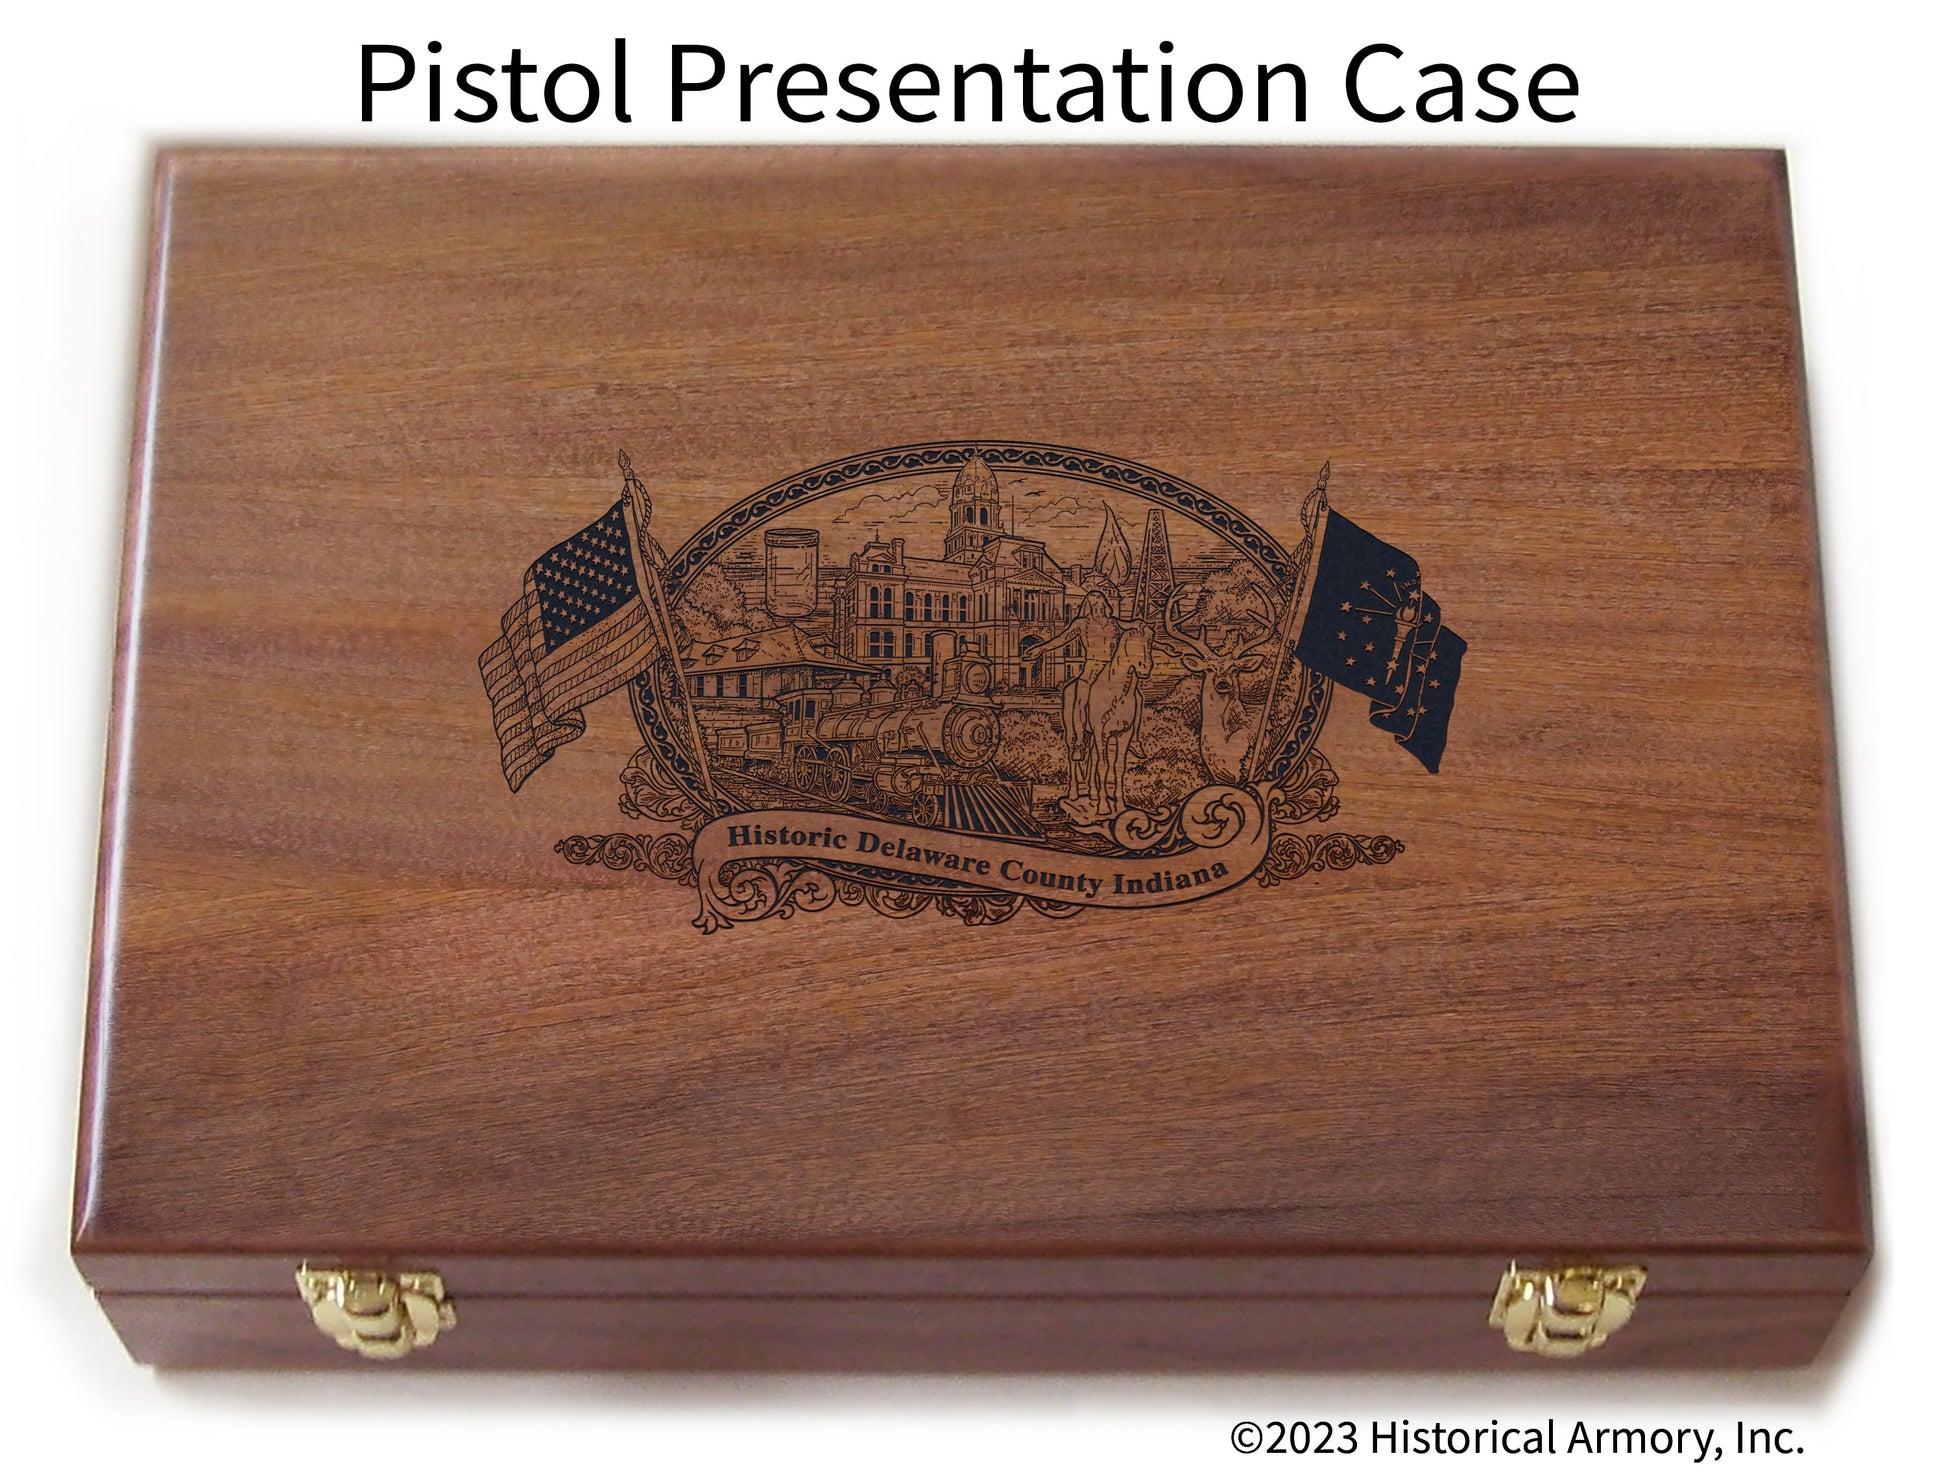 Delaware County Indiana Engraved .45 Auto Ruger 1911 Presentation Case